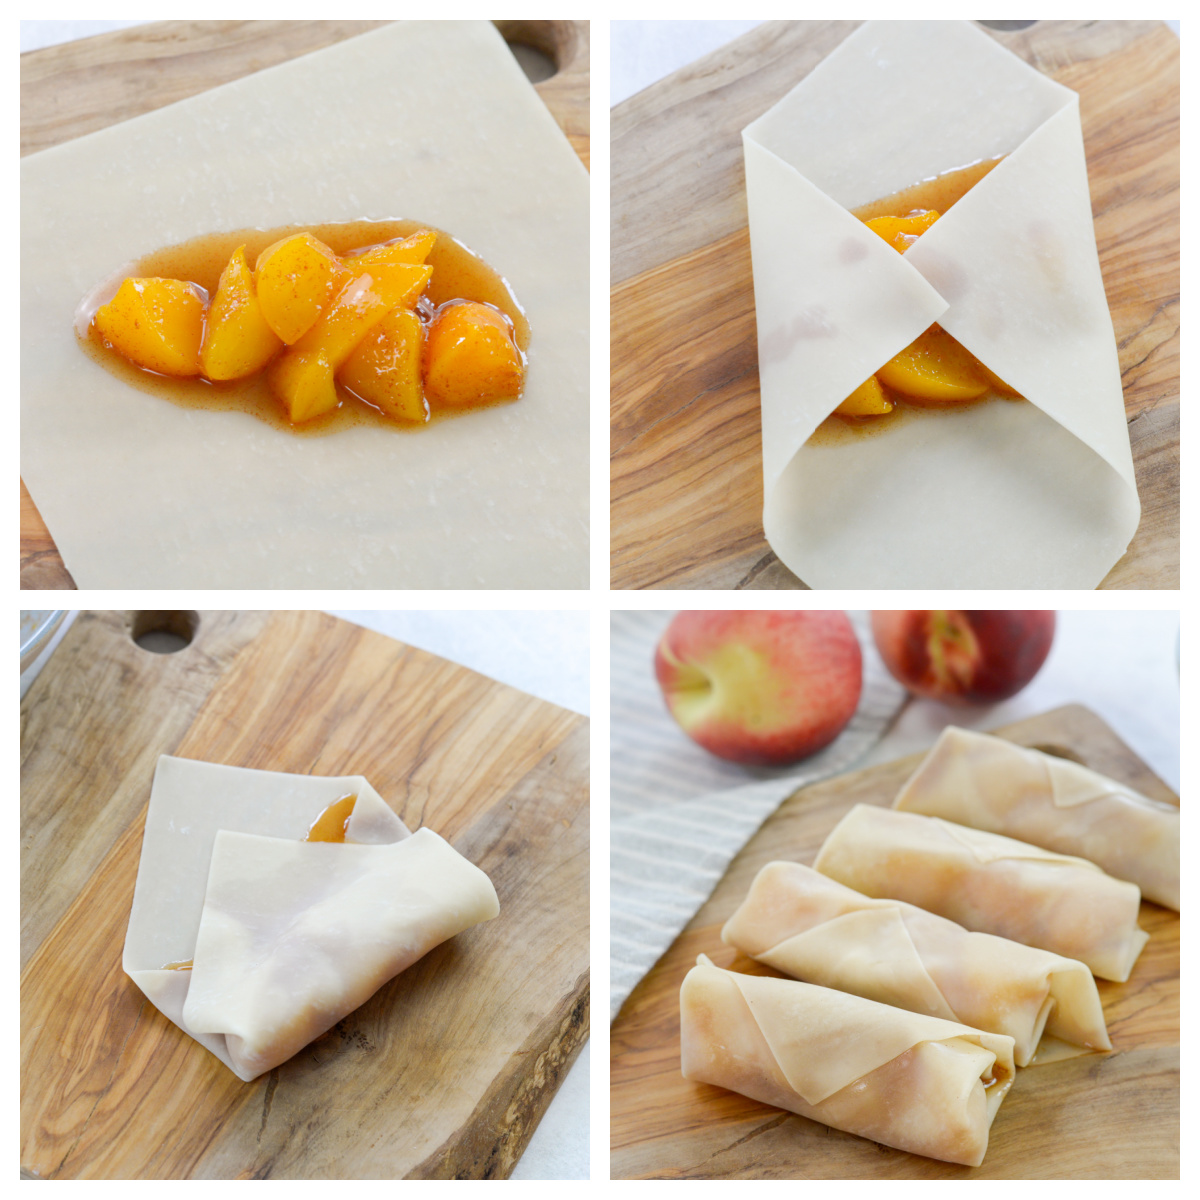 Peach cobbler being rolled into an egg roll.